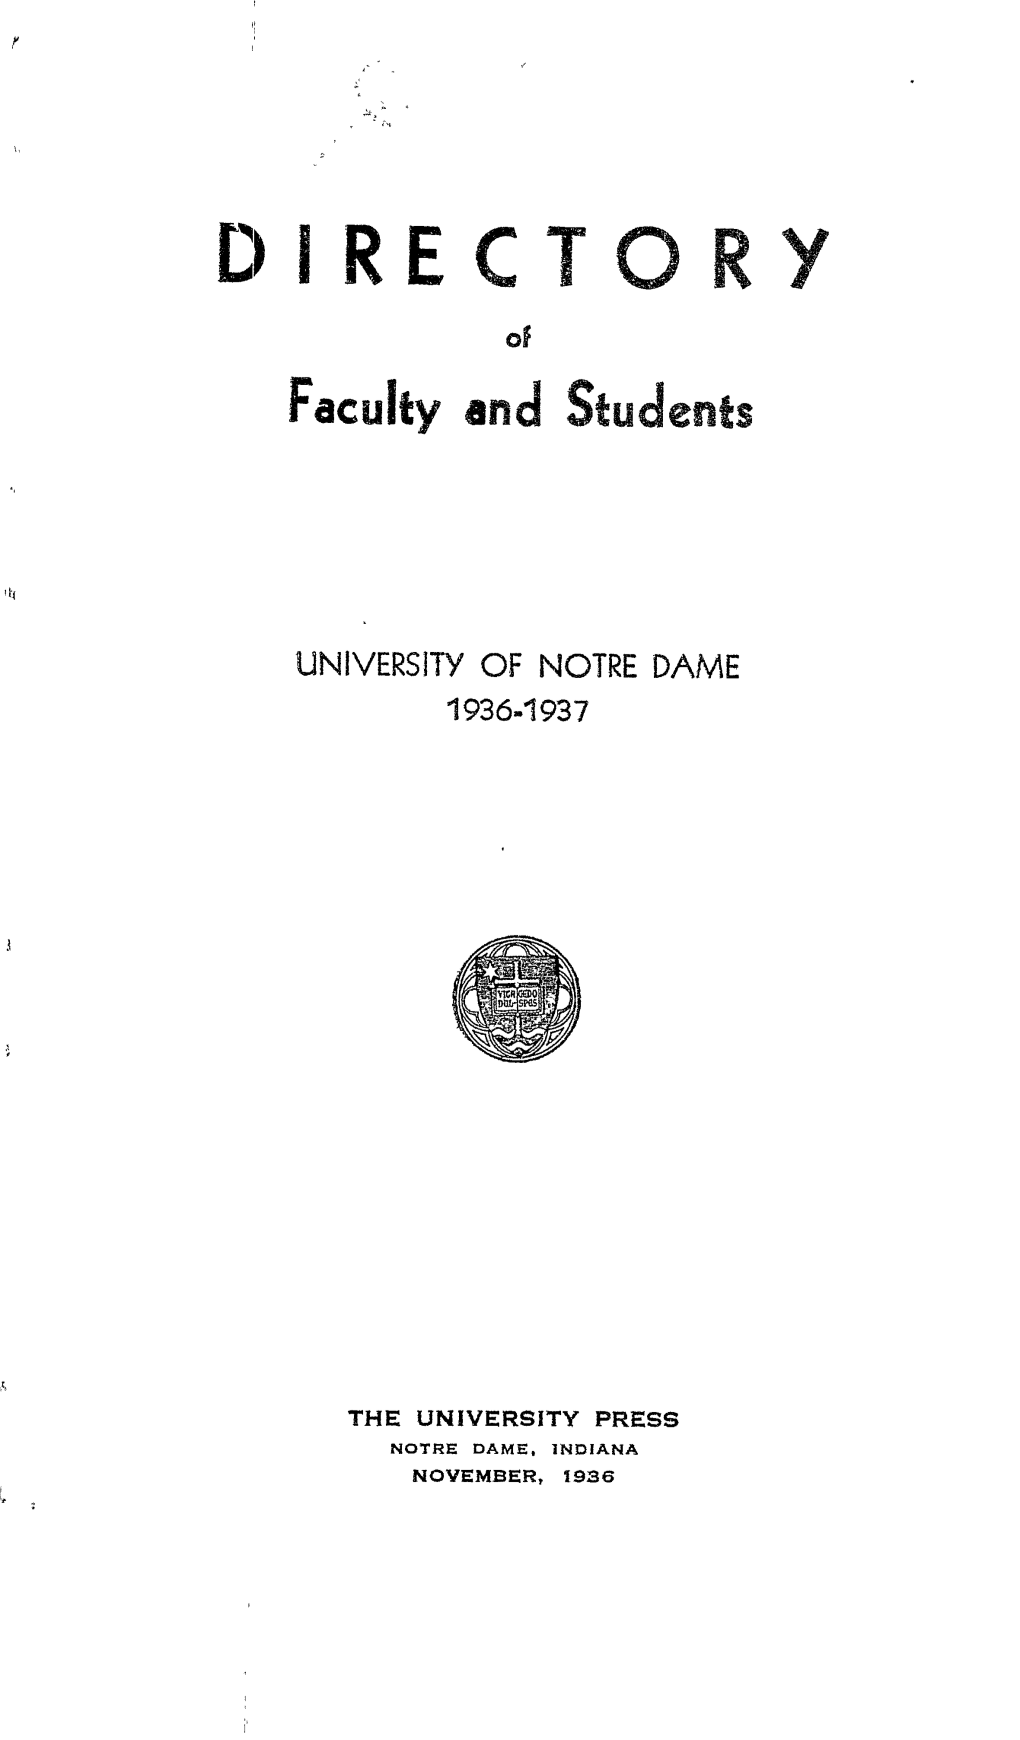 Notre Dame Directory, 1936